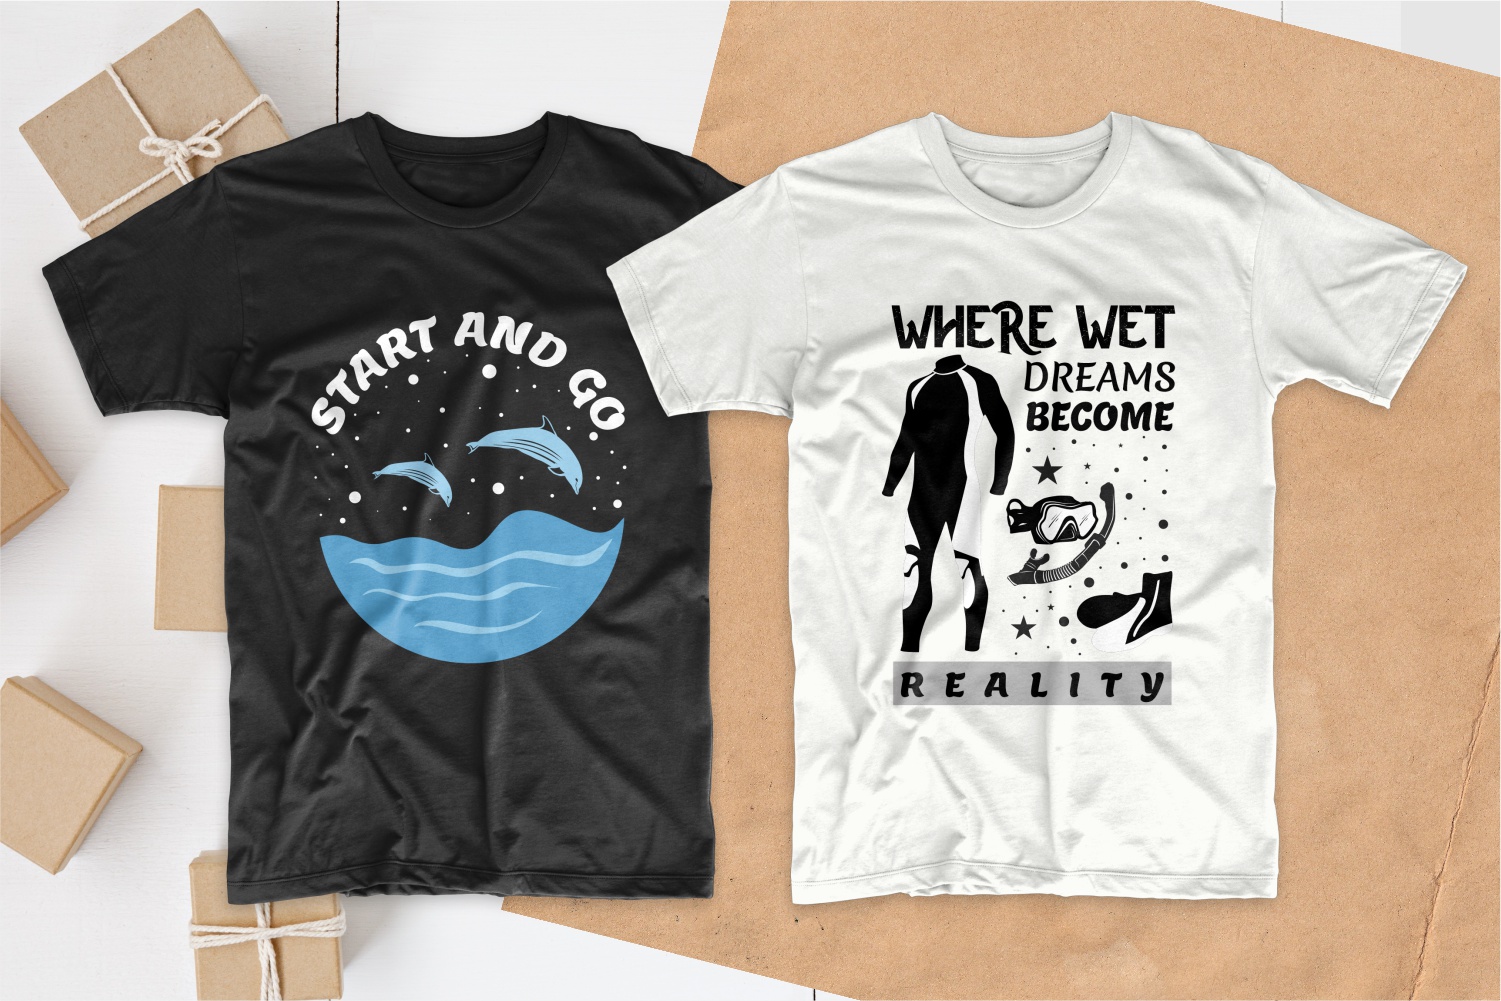 Two T-shirts - black and white with dolphins and a diving suit.